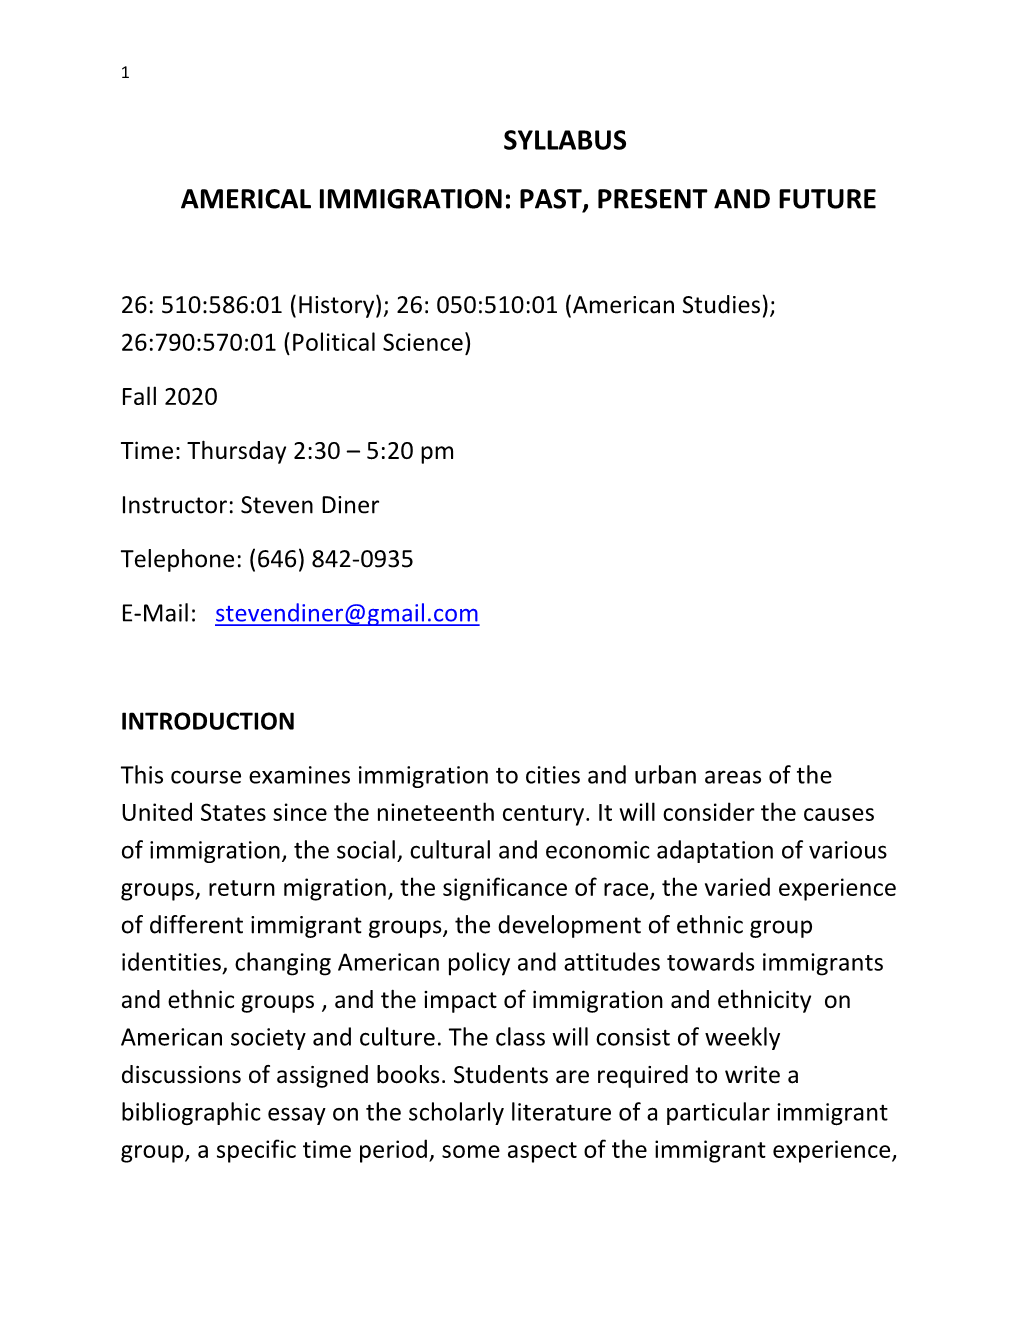 Syllabus Americal Immigration: Past, Present and Future